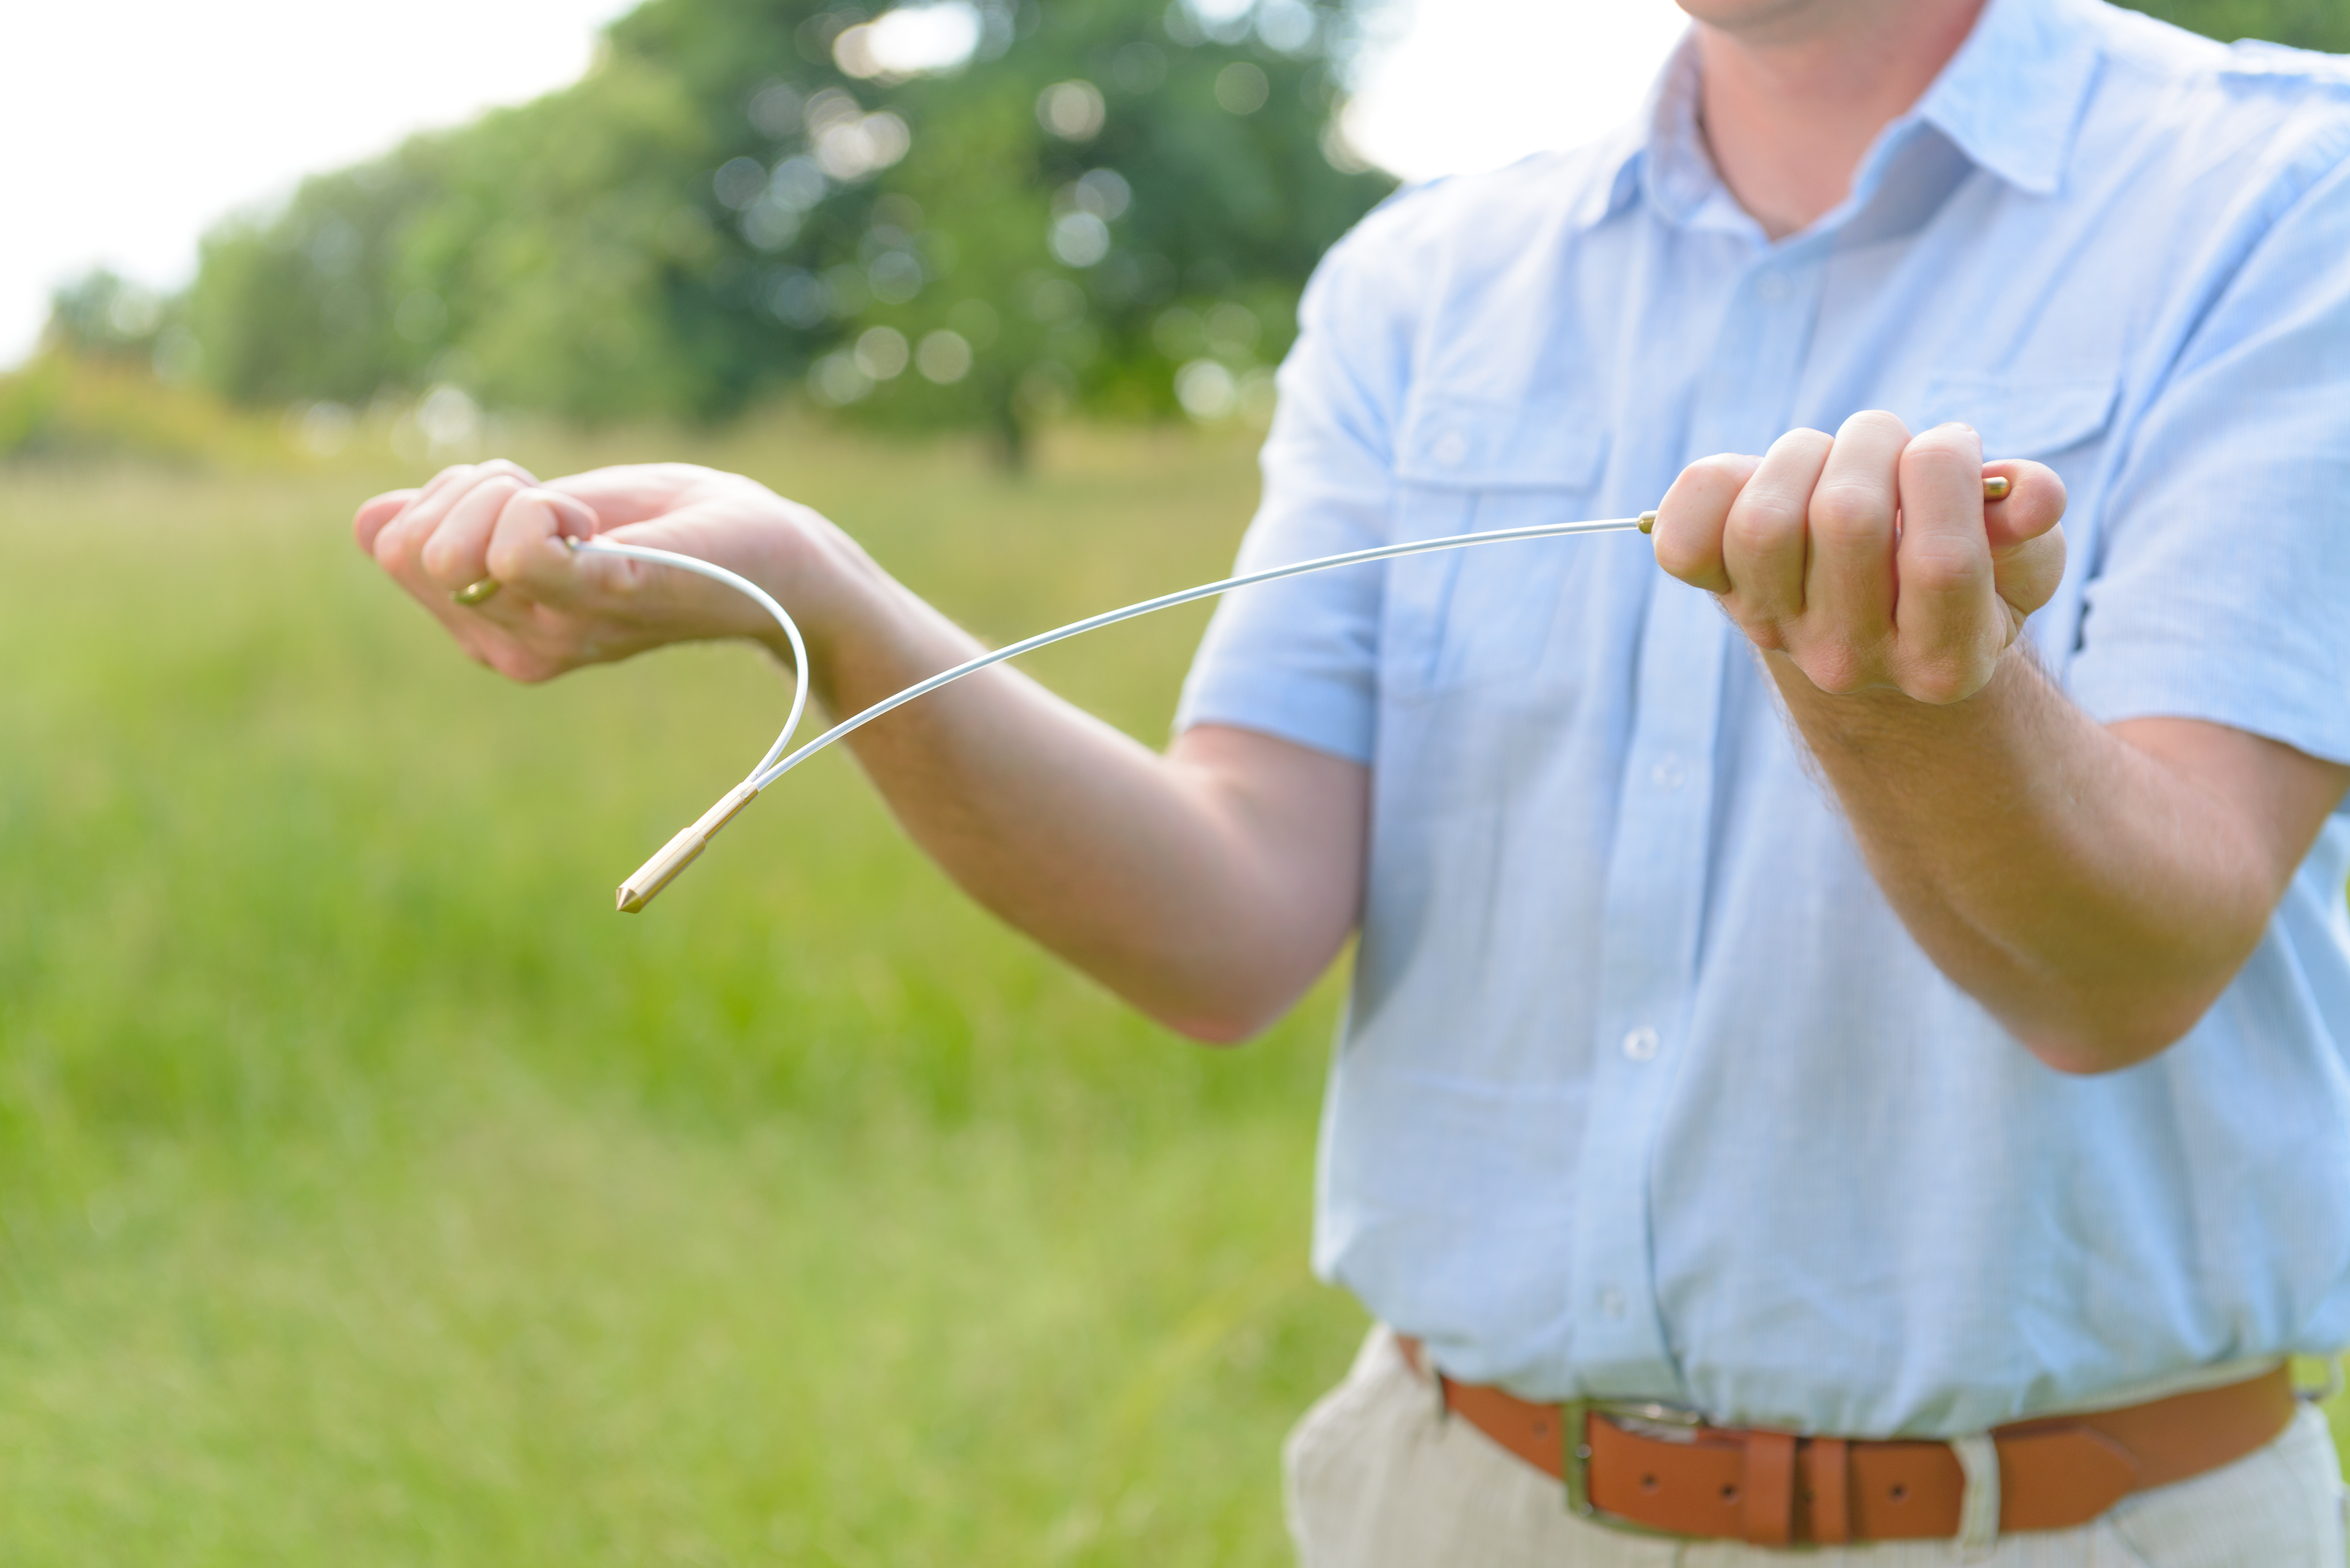 A dowsing rod (Getty Images)